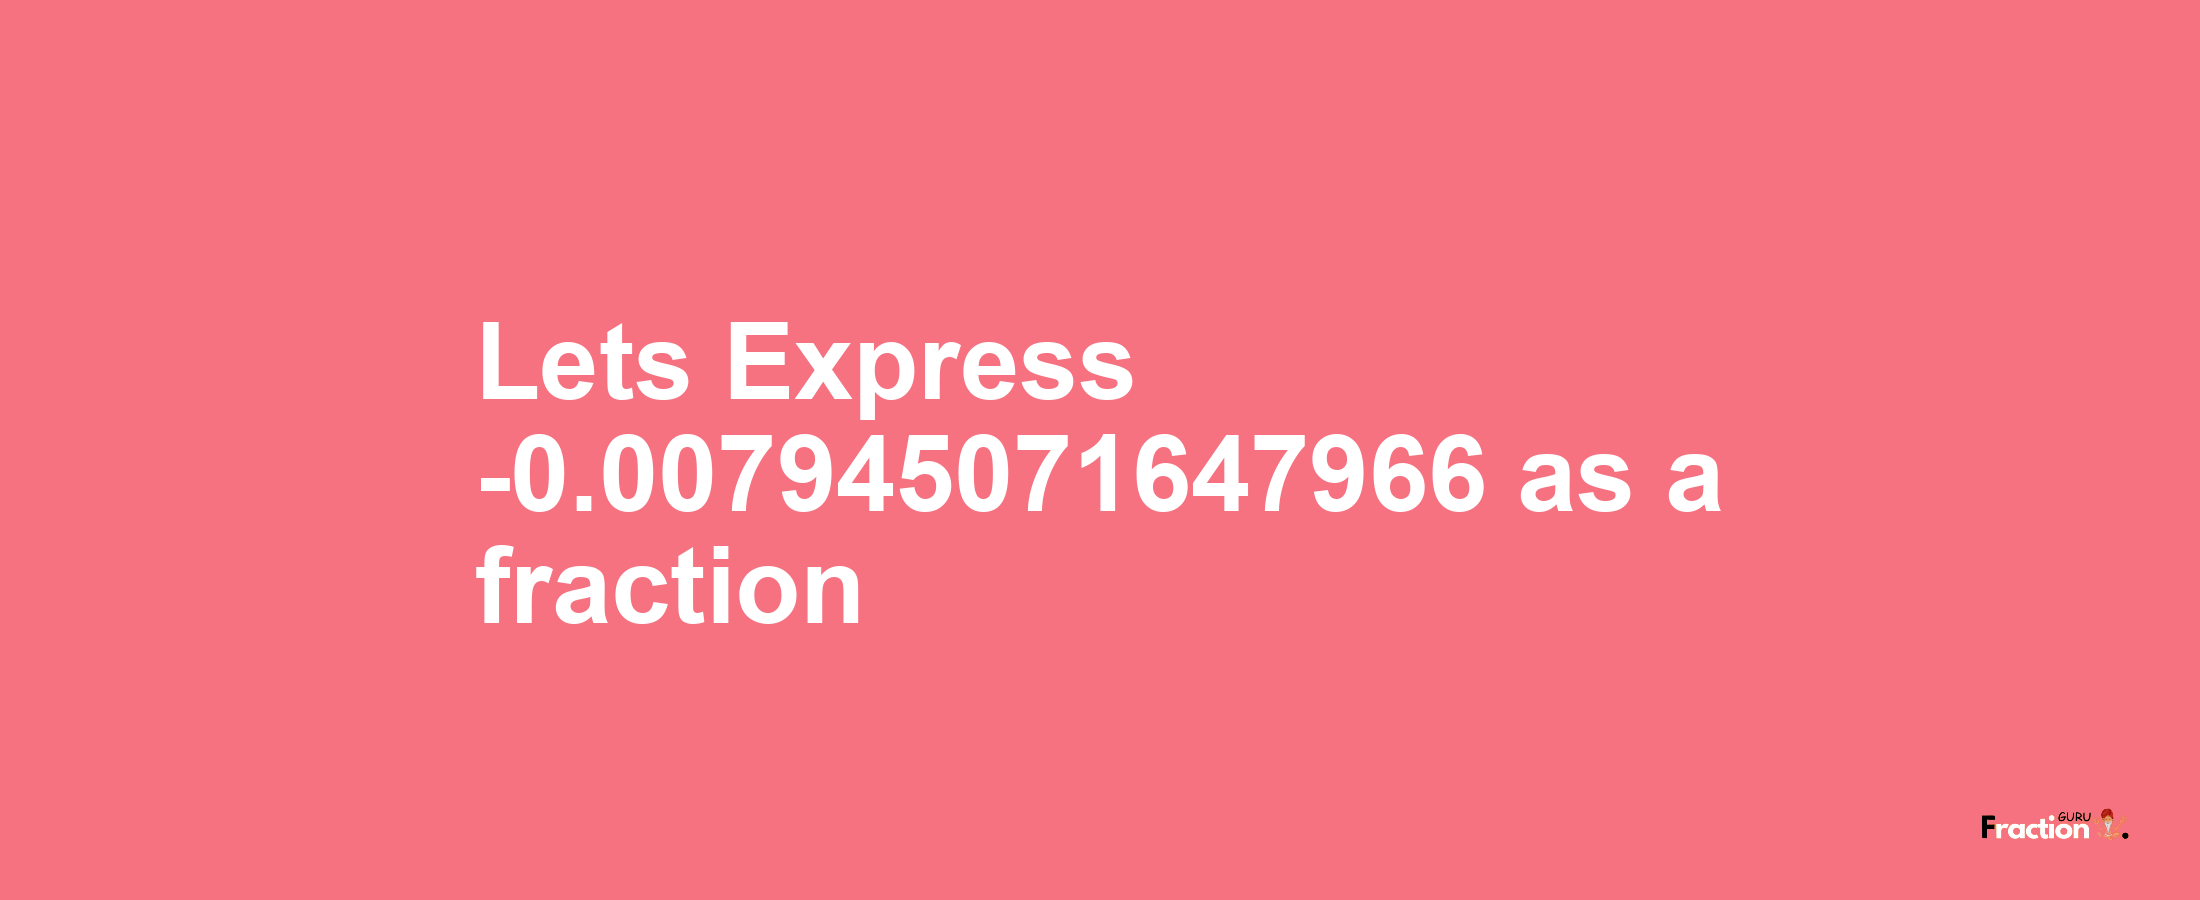 Lets Express -0.007945071647966 as afraction